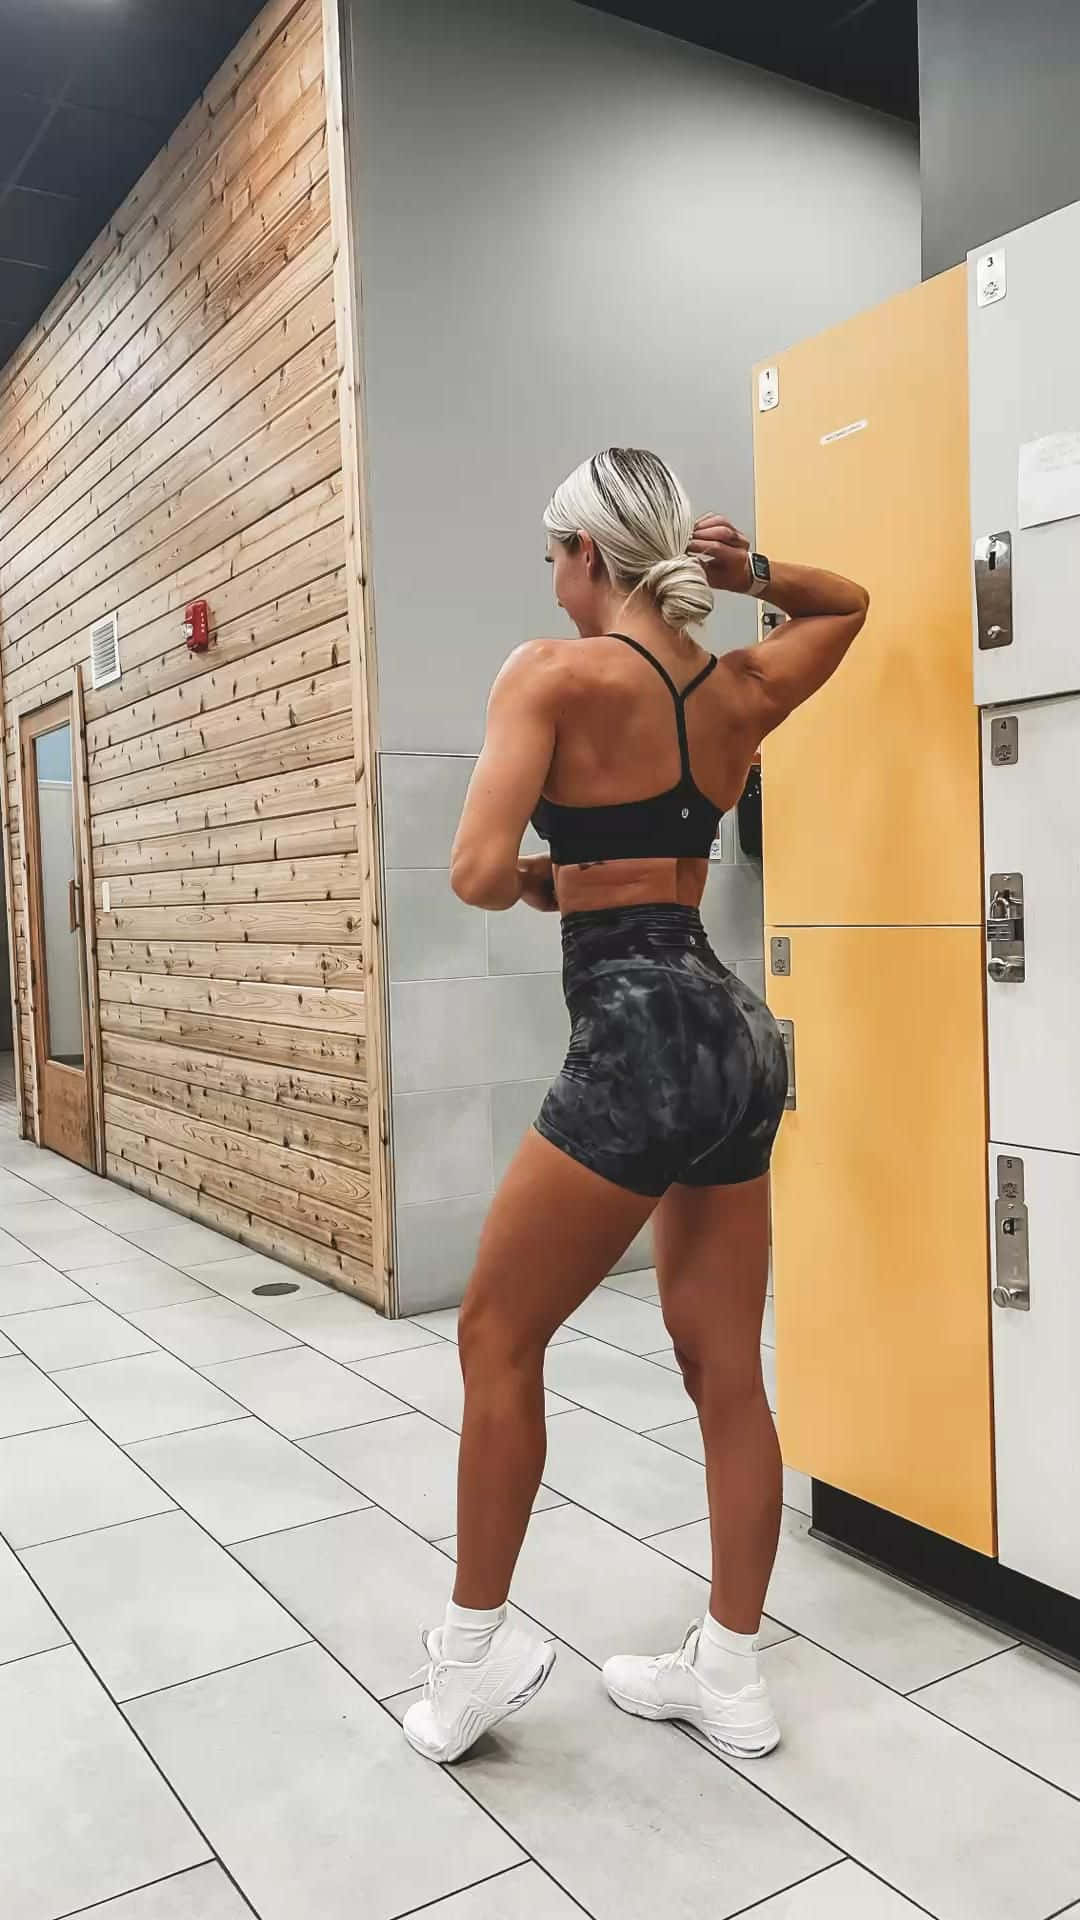 A Woman In A Gym Posing In Front Of A Locker Wallpaper